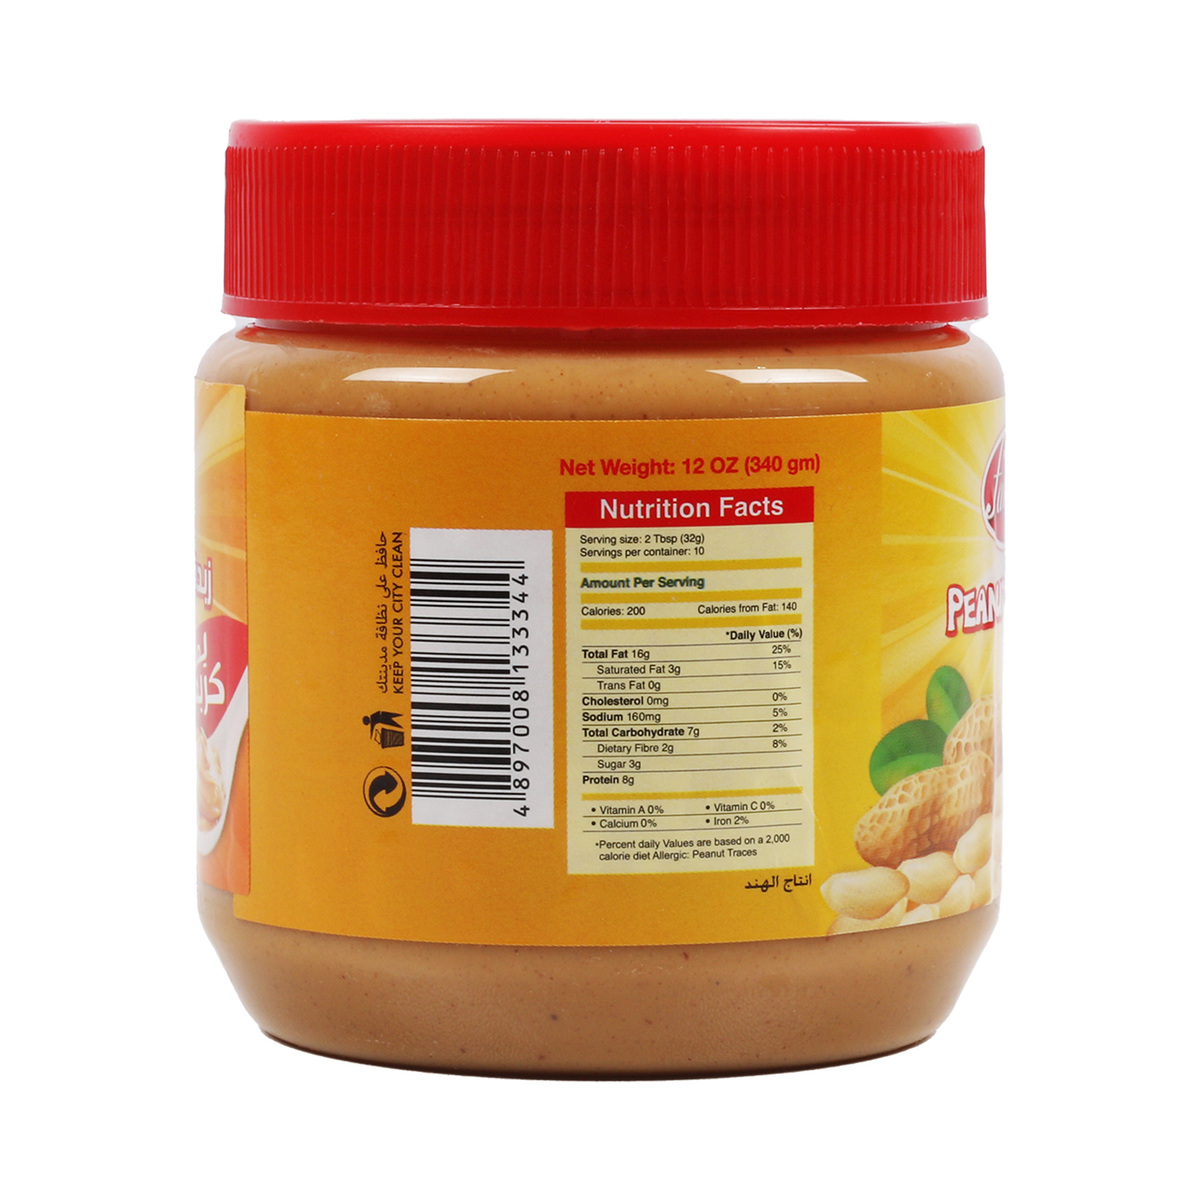 Family Creamy Peanut Butter Value Pack 2 x 340g